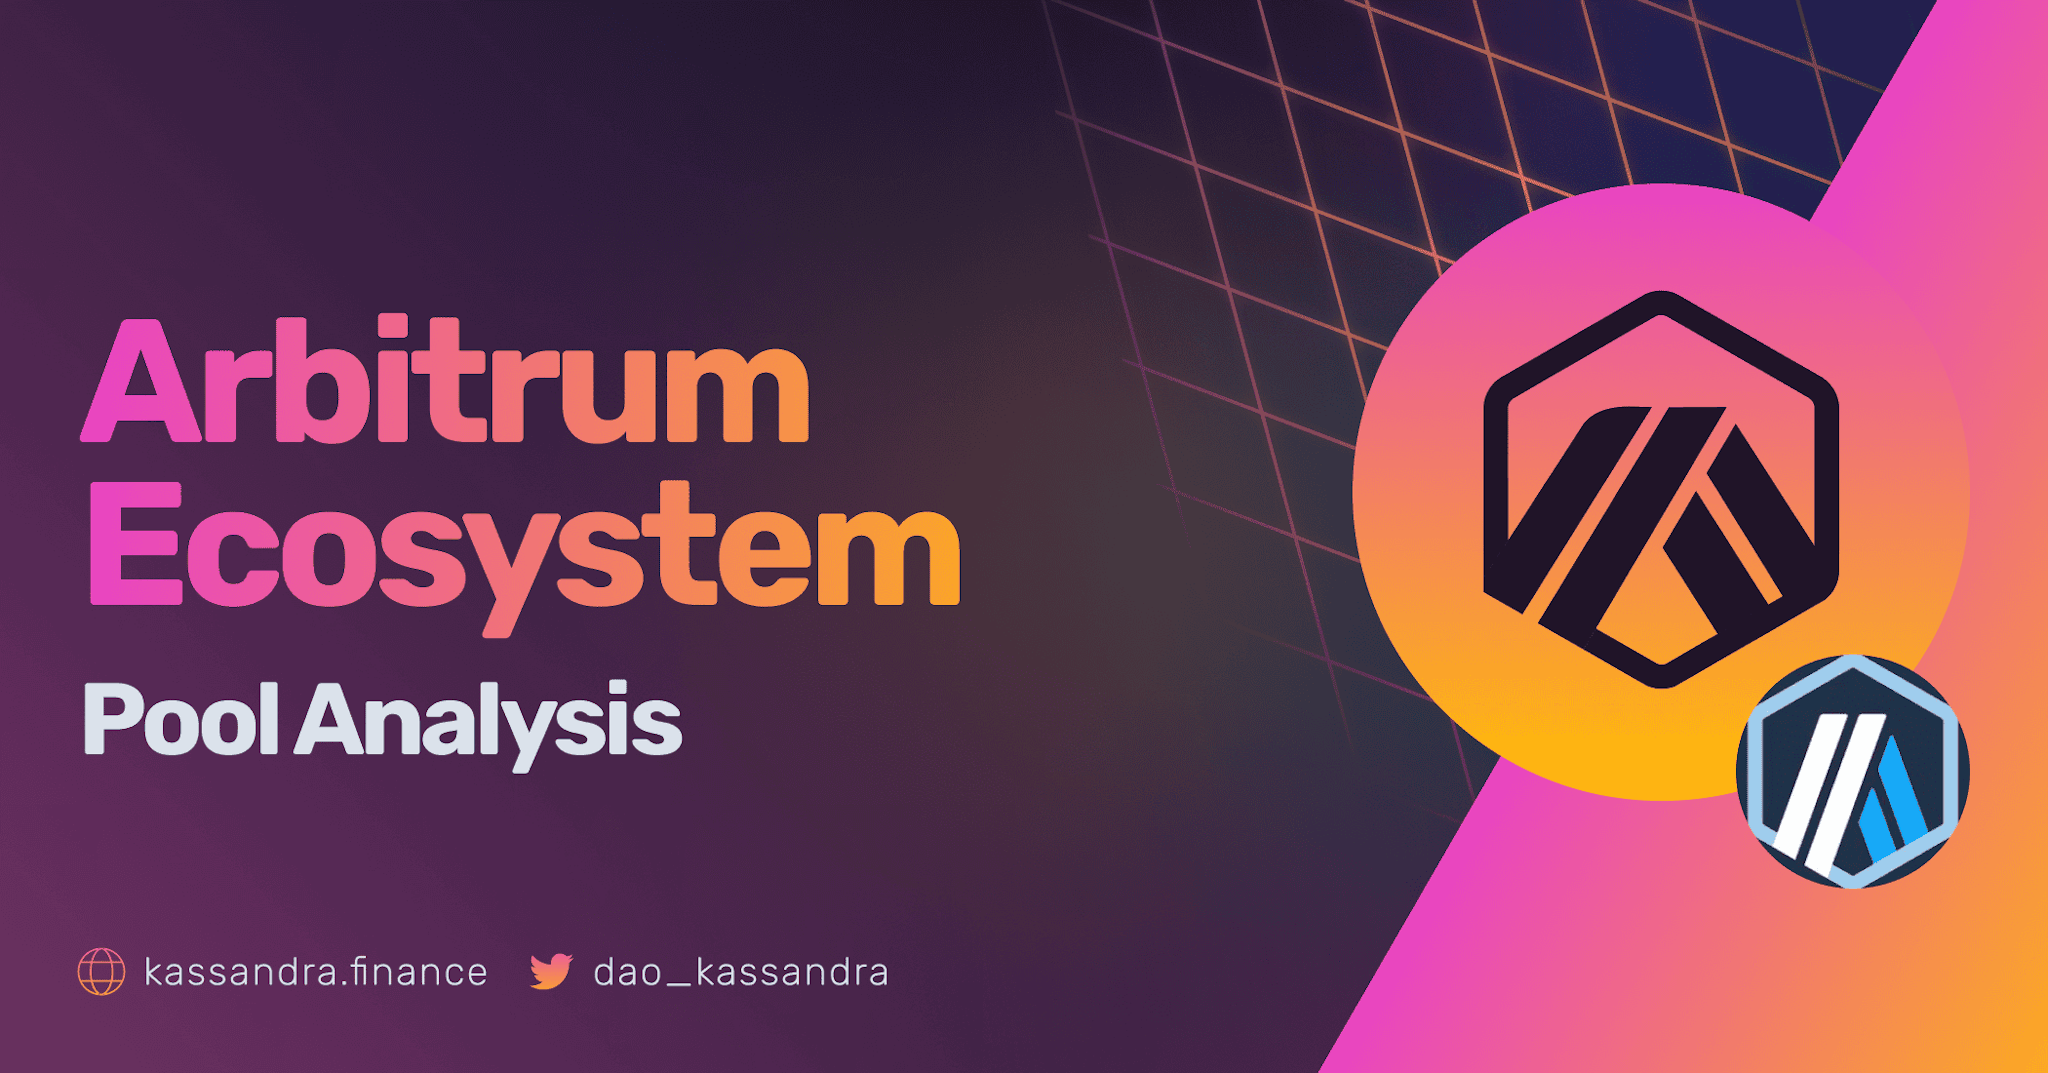 A card with Kassandra's Visual Identity with the words "Arbitrum Ecosystem Pool Analysis", in reference with Kassandra's Managed Pools.